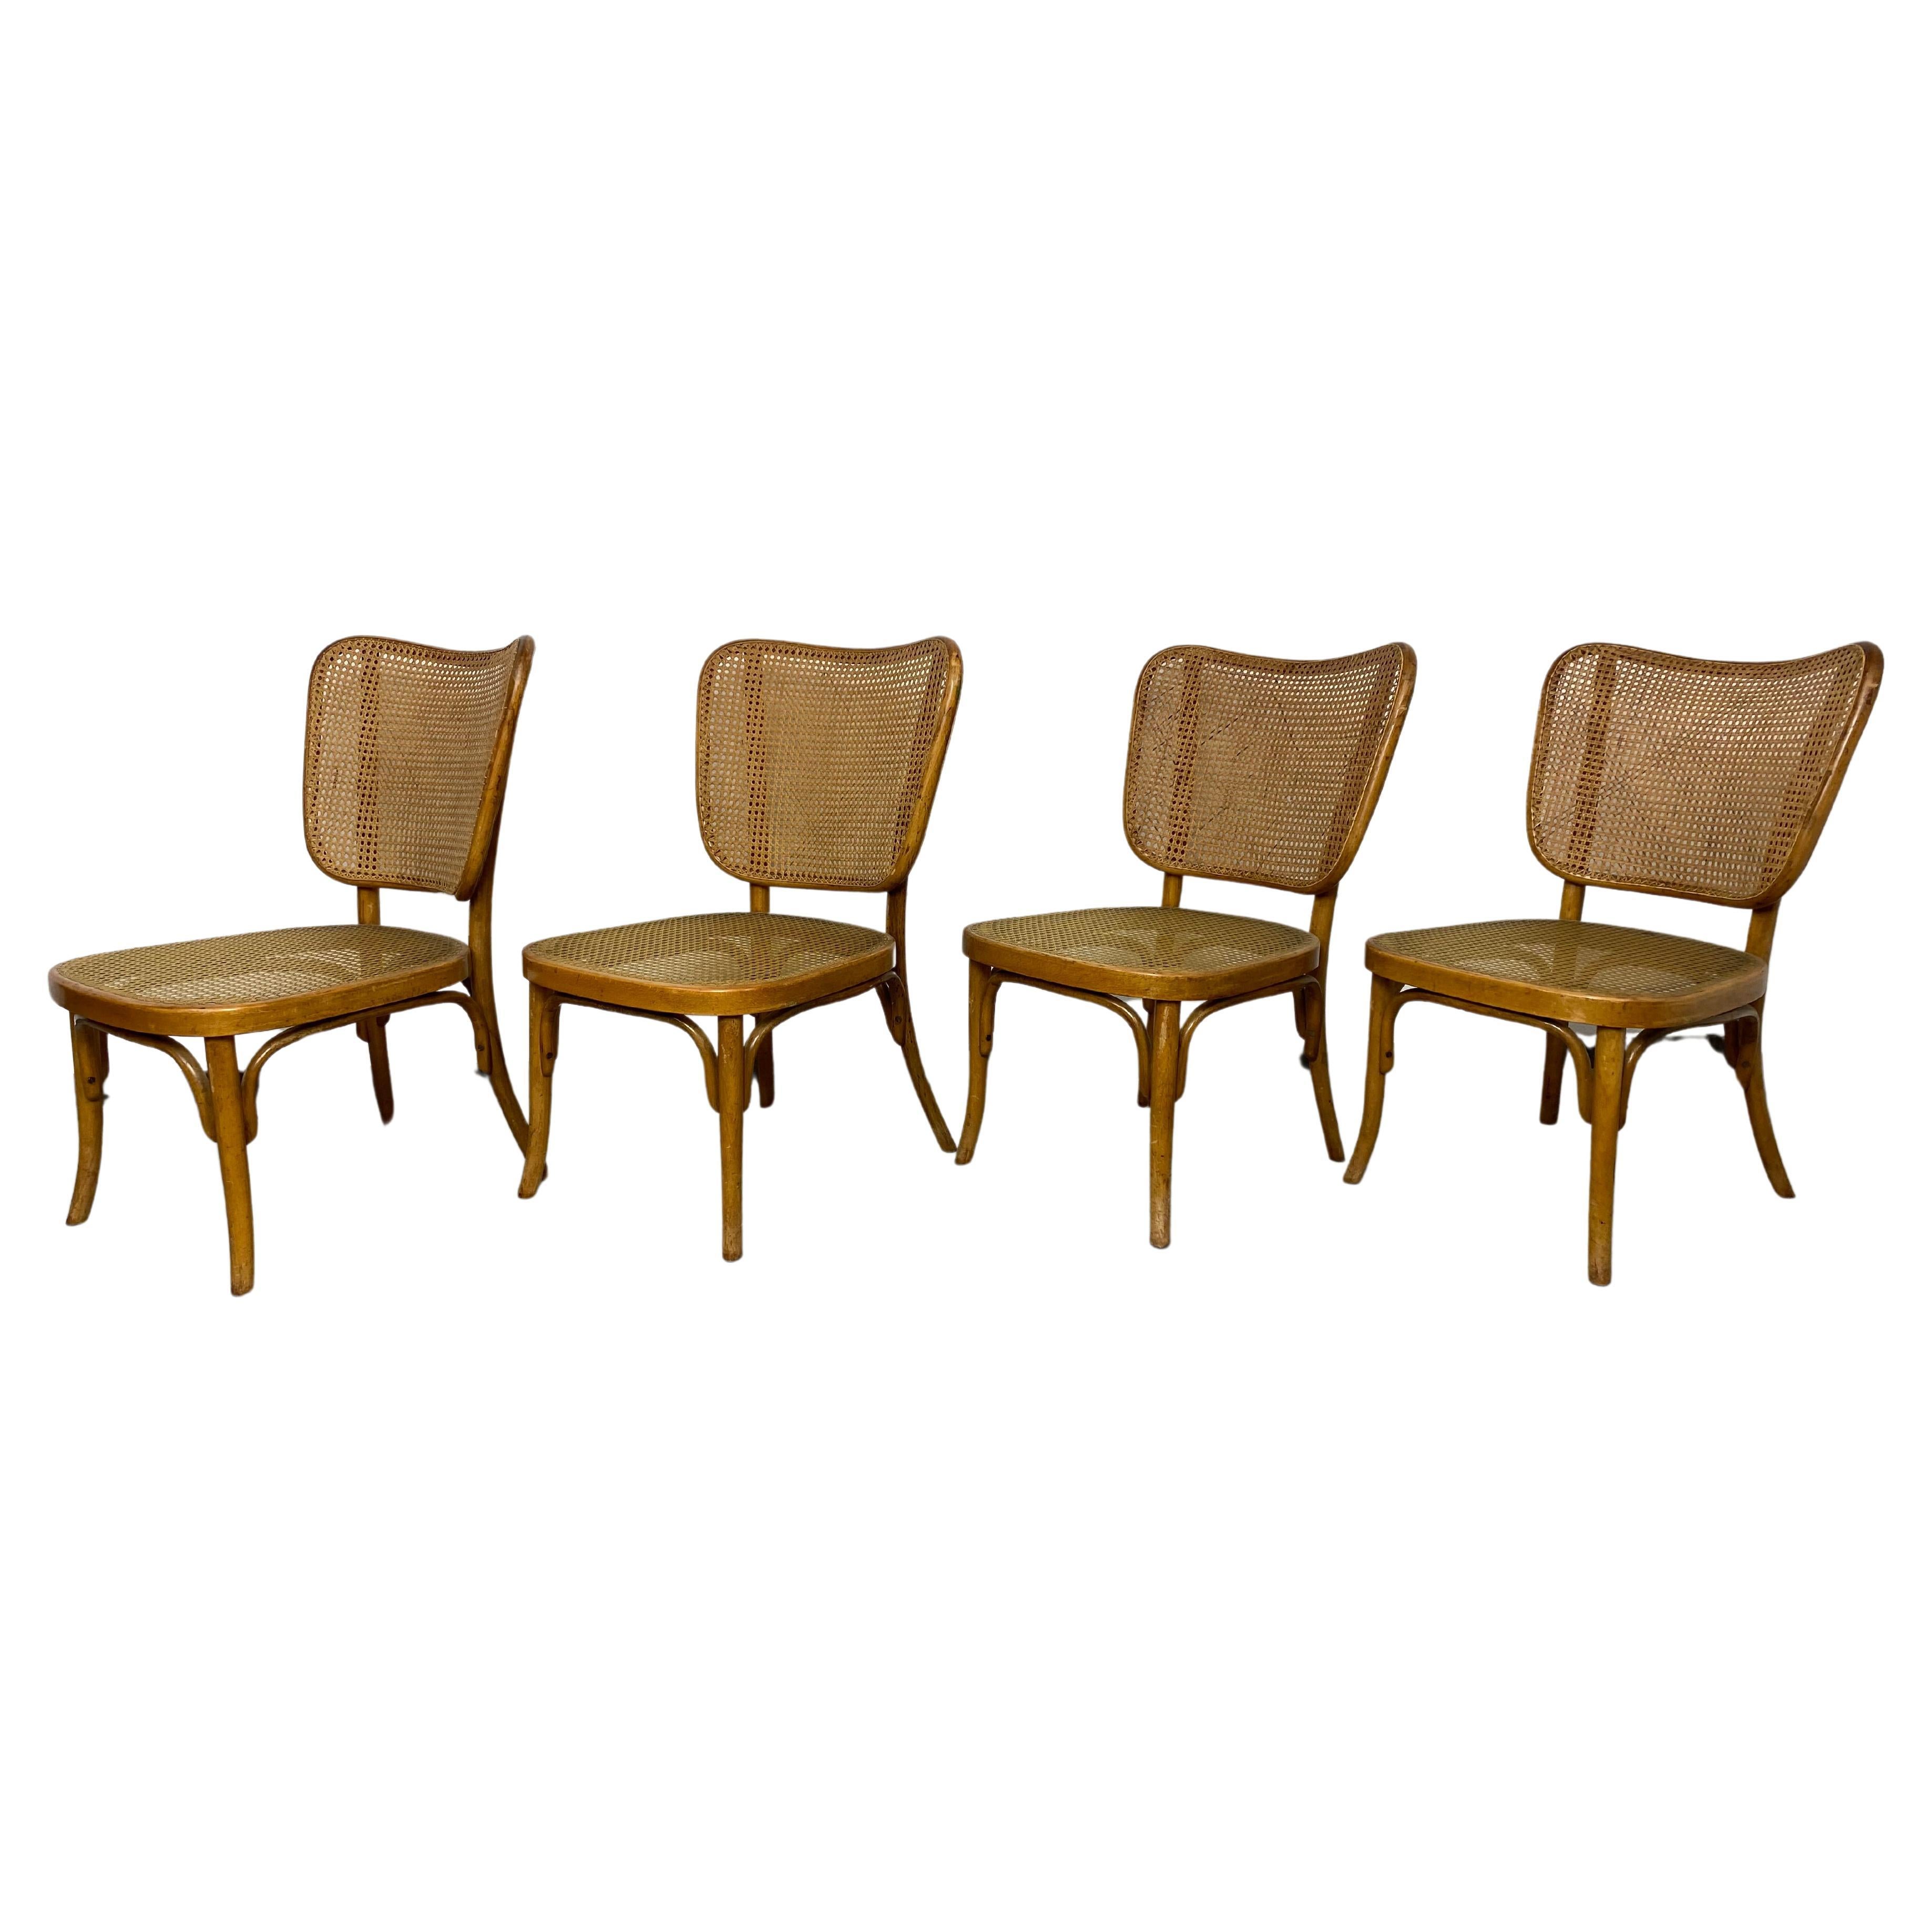 Set of 4 chairs model A821 by Adolf Gustav Schneck for Thonet Mundus For Sale